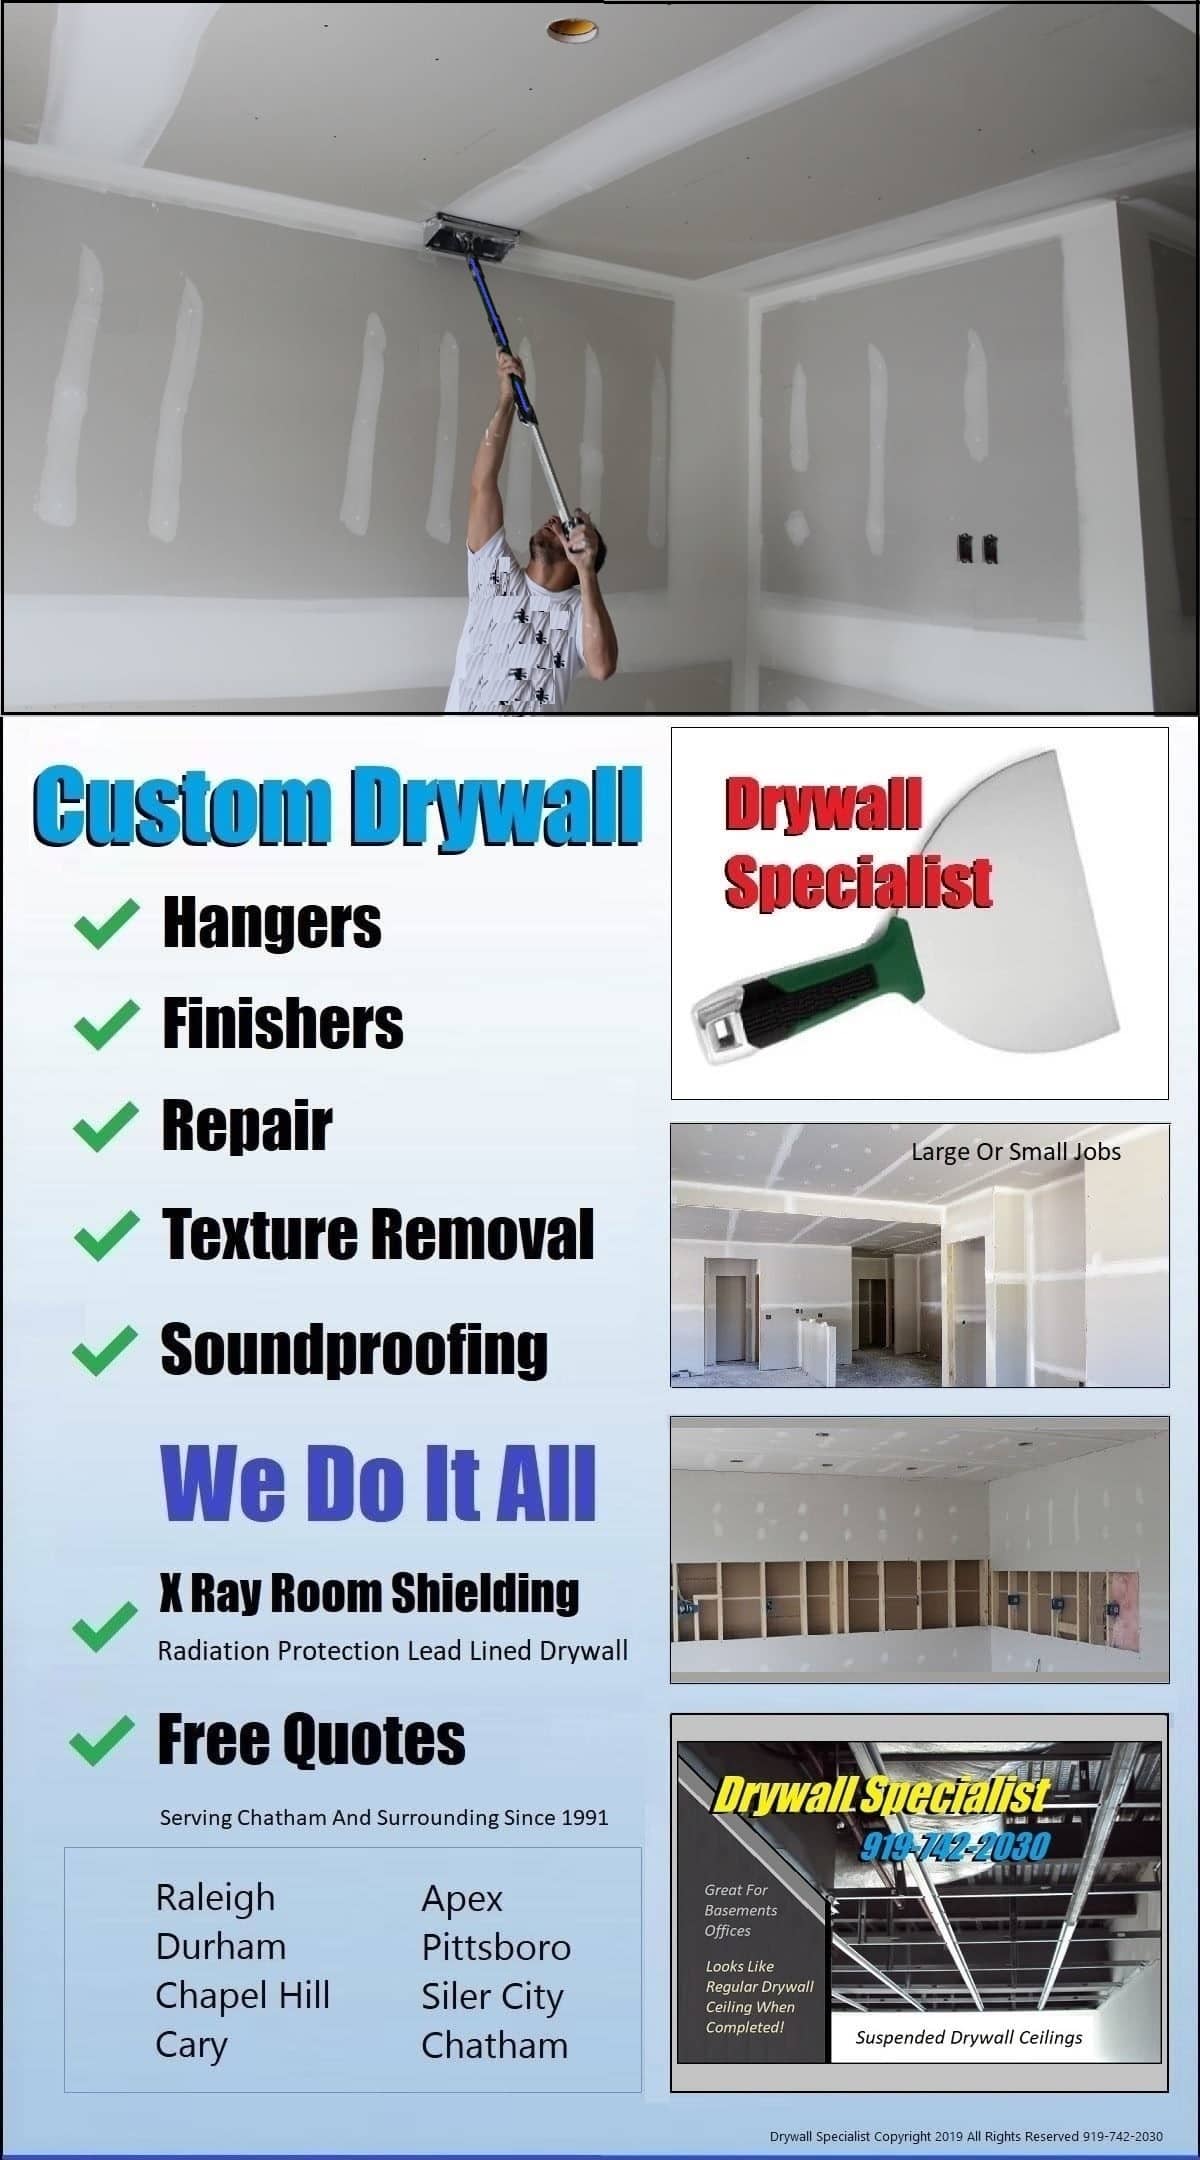 Wilsonville Wallboard Hanger Finisher Repair And Popcorn Texture Removal Contractor | North Carolina